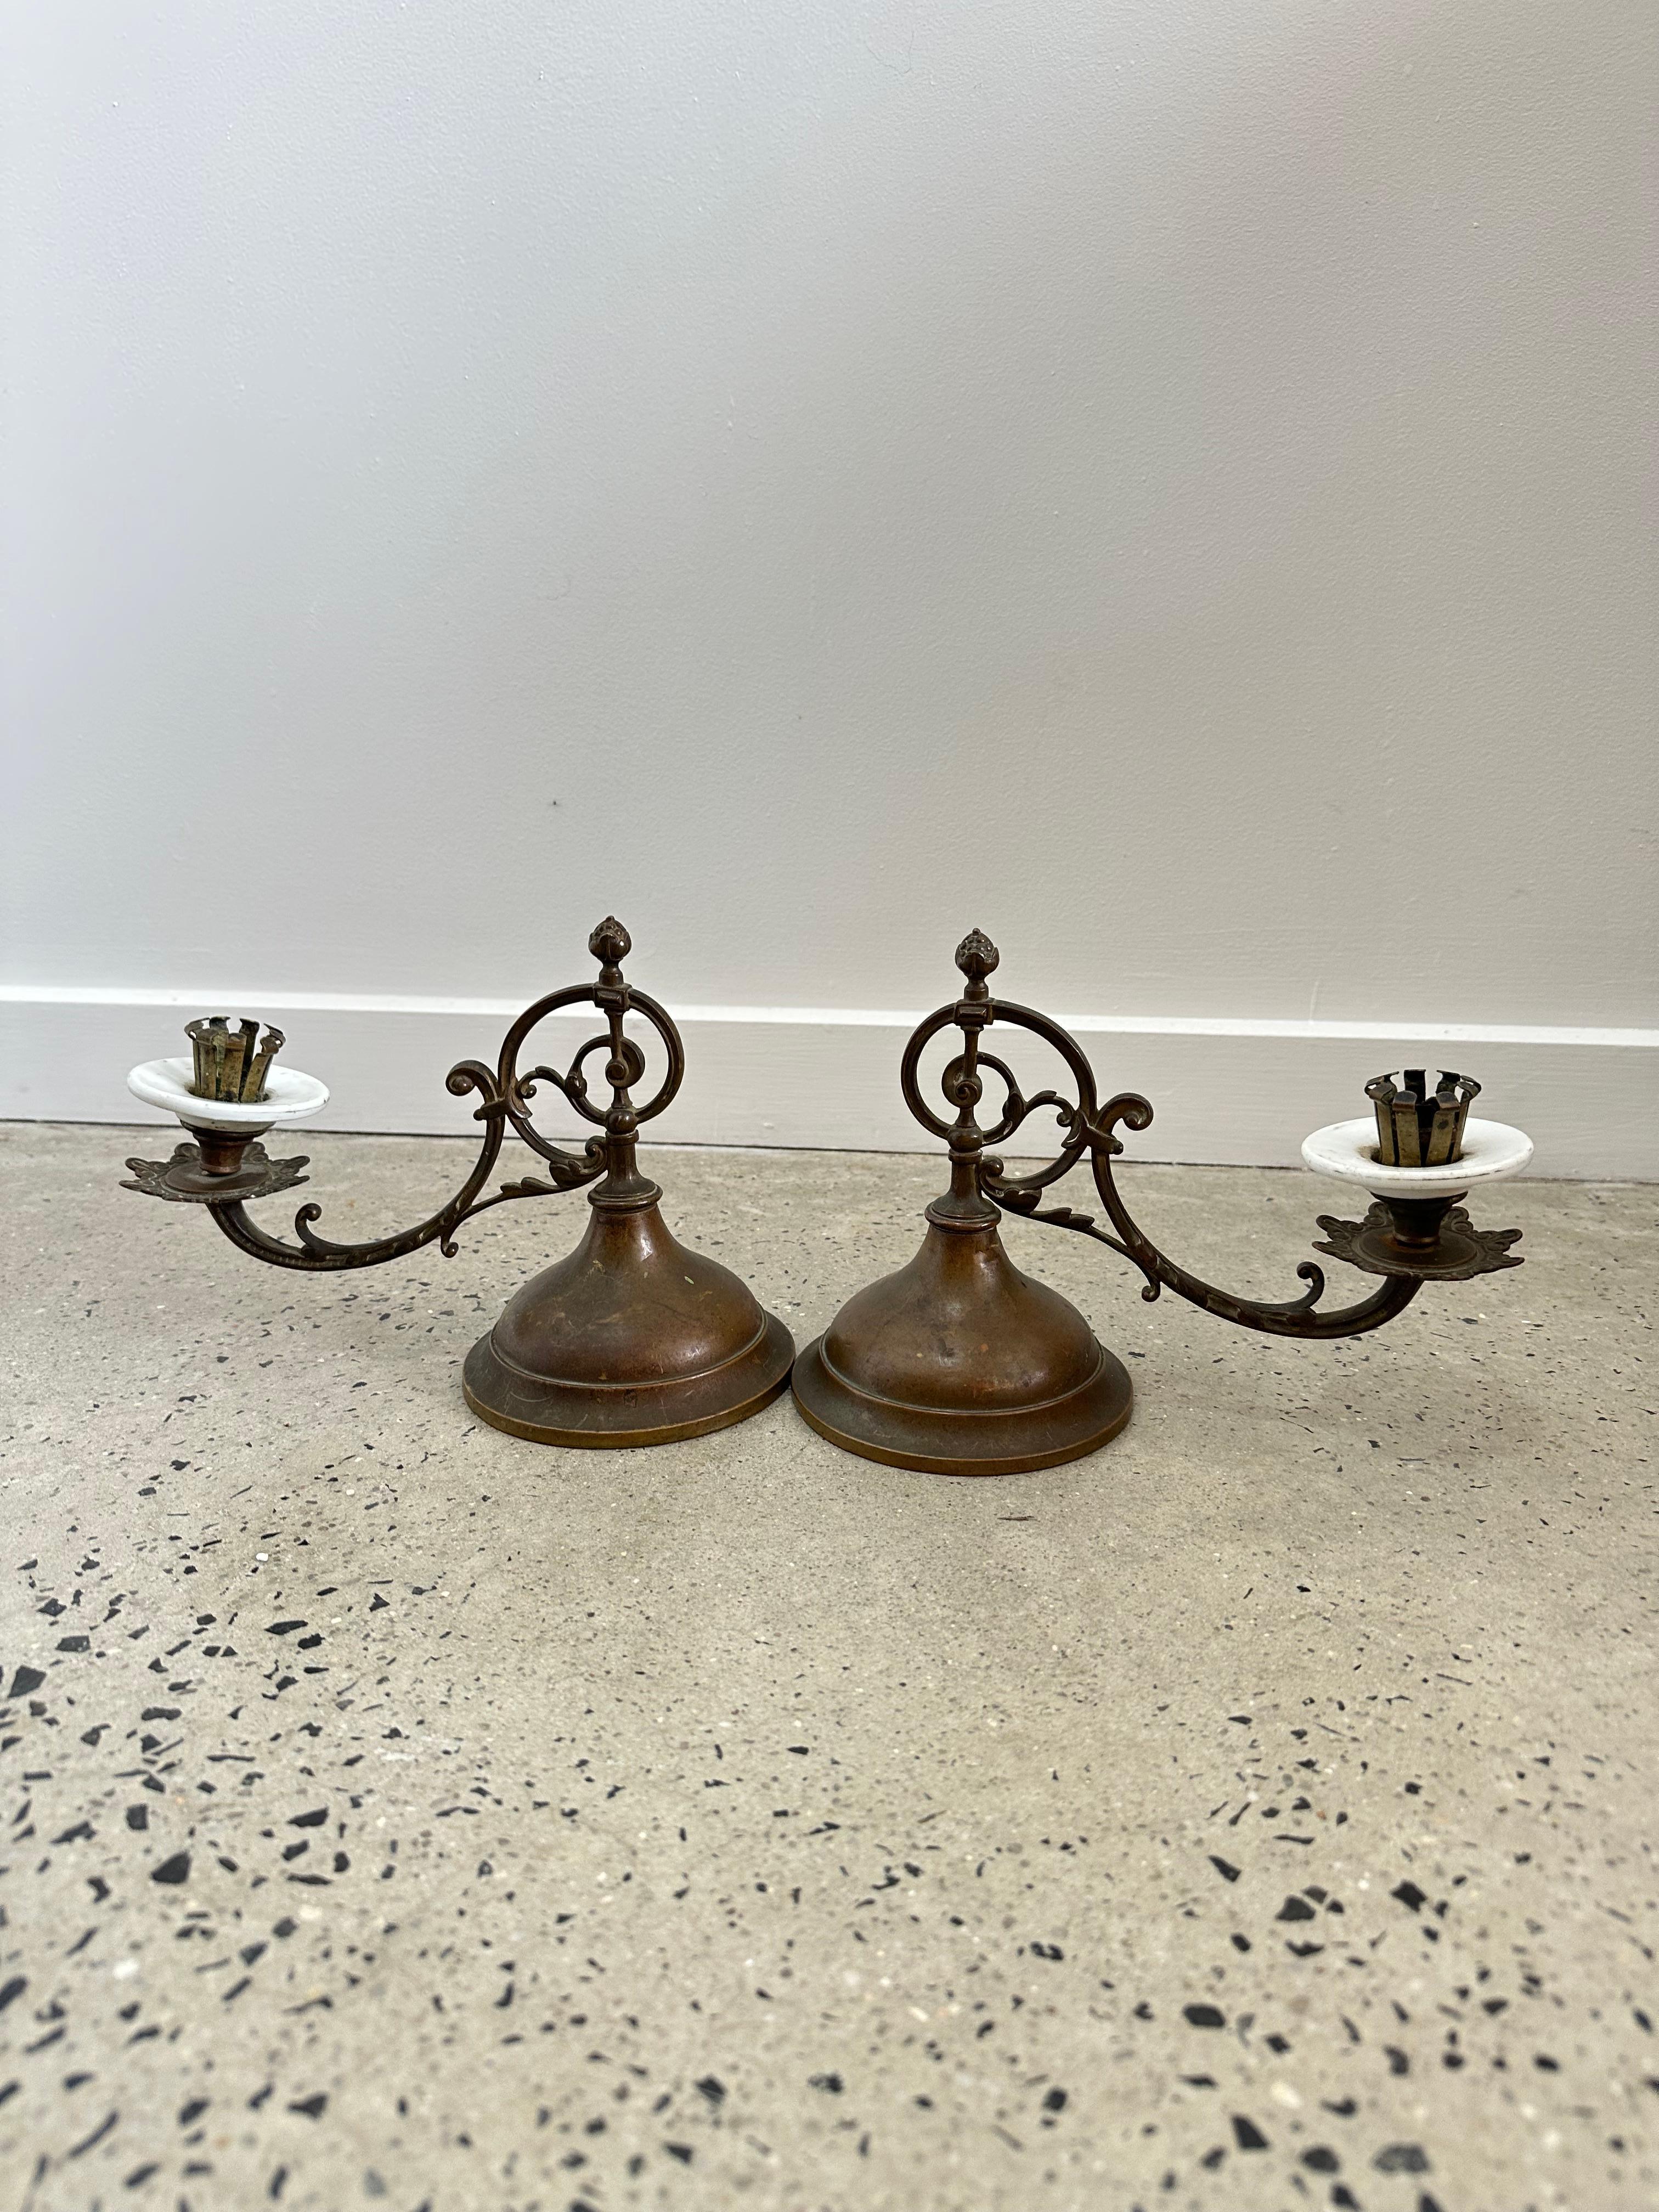 American brass and porcelain candle holders from the 1800s are a popular collector's item among antique enthusiasts. During this time period, candle holders were often used as a primary source of lighting in homes, and as a result, they were